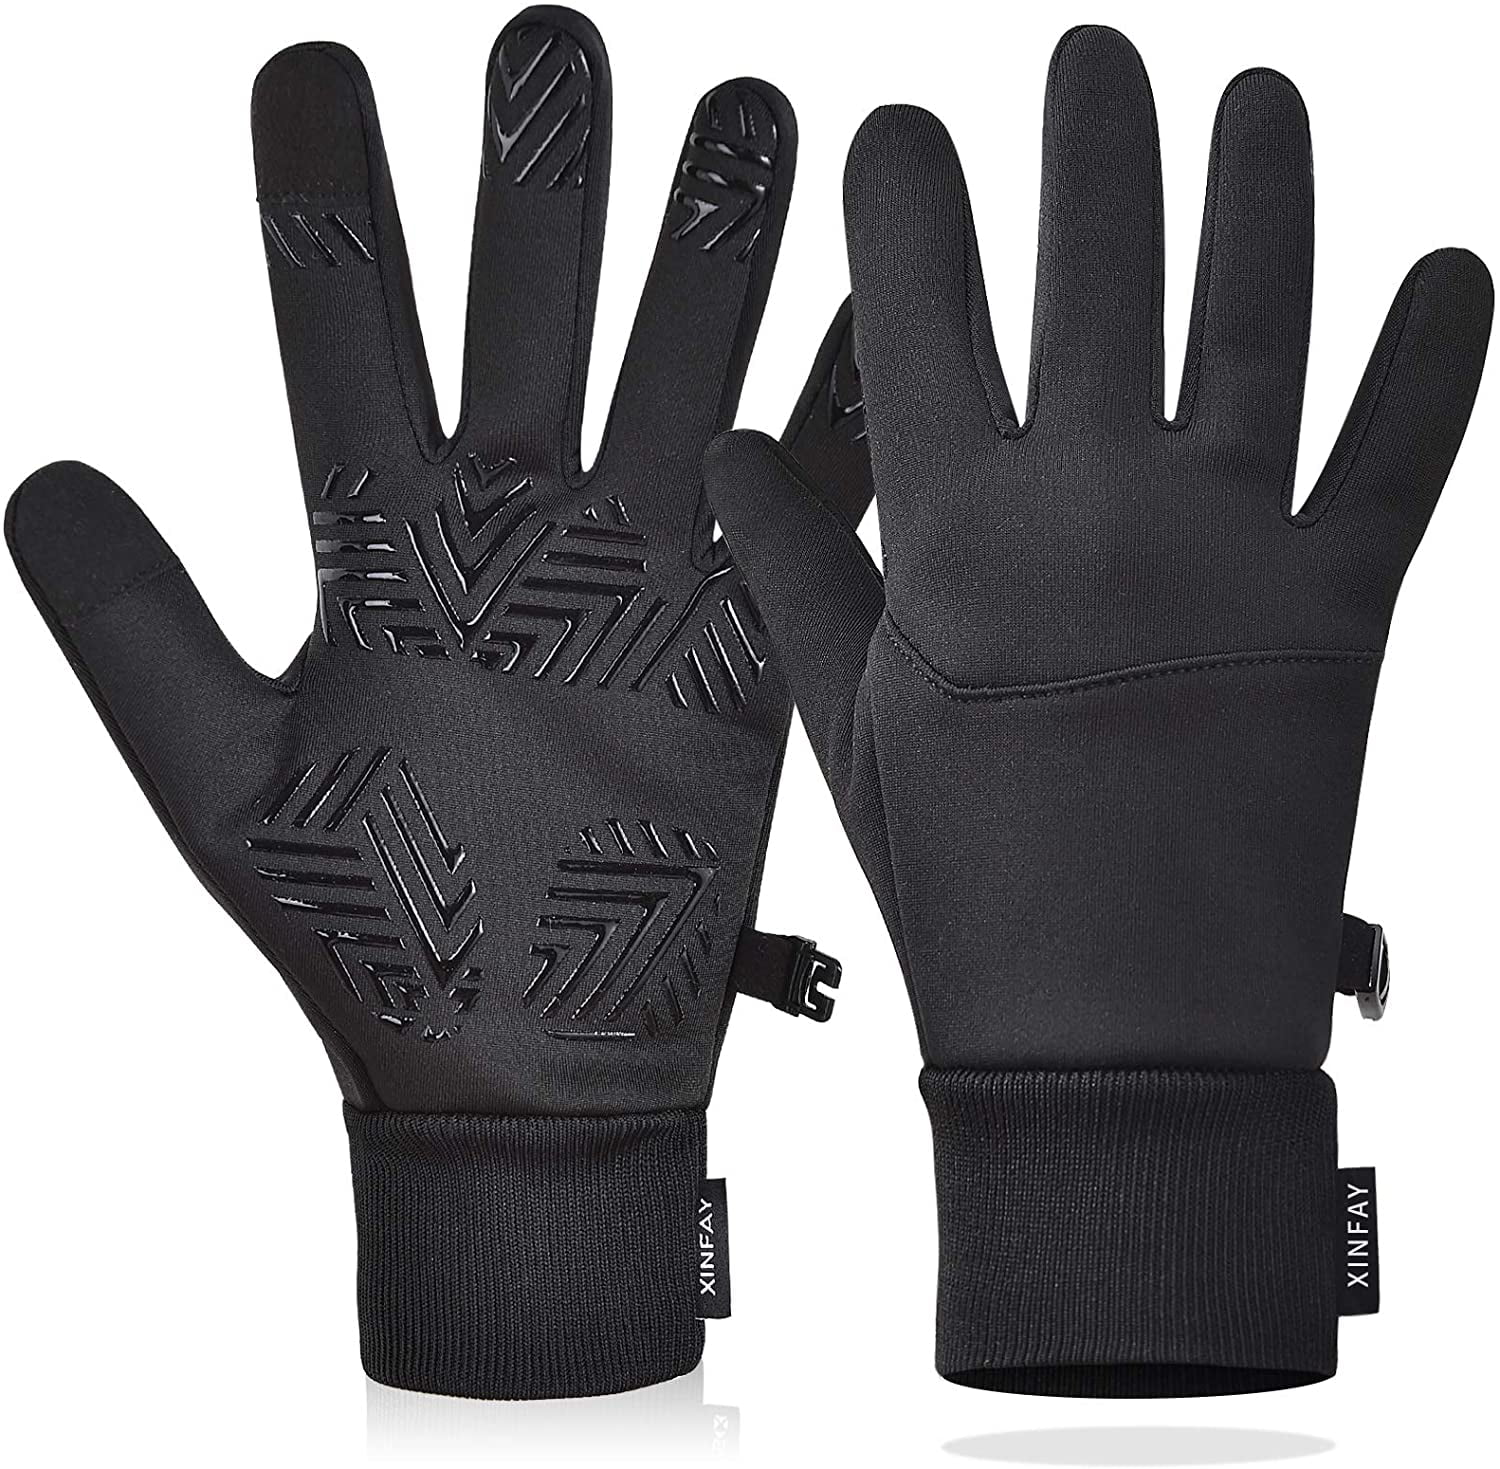 Winter Touch Screen Gloves Warm Windproof,Full Palm Non-Slip for Driving Running 